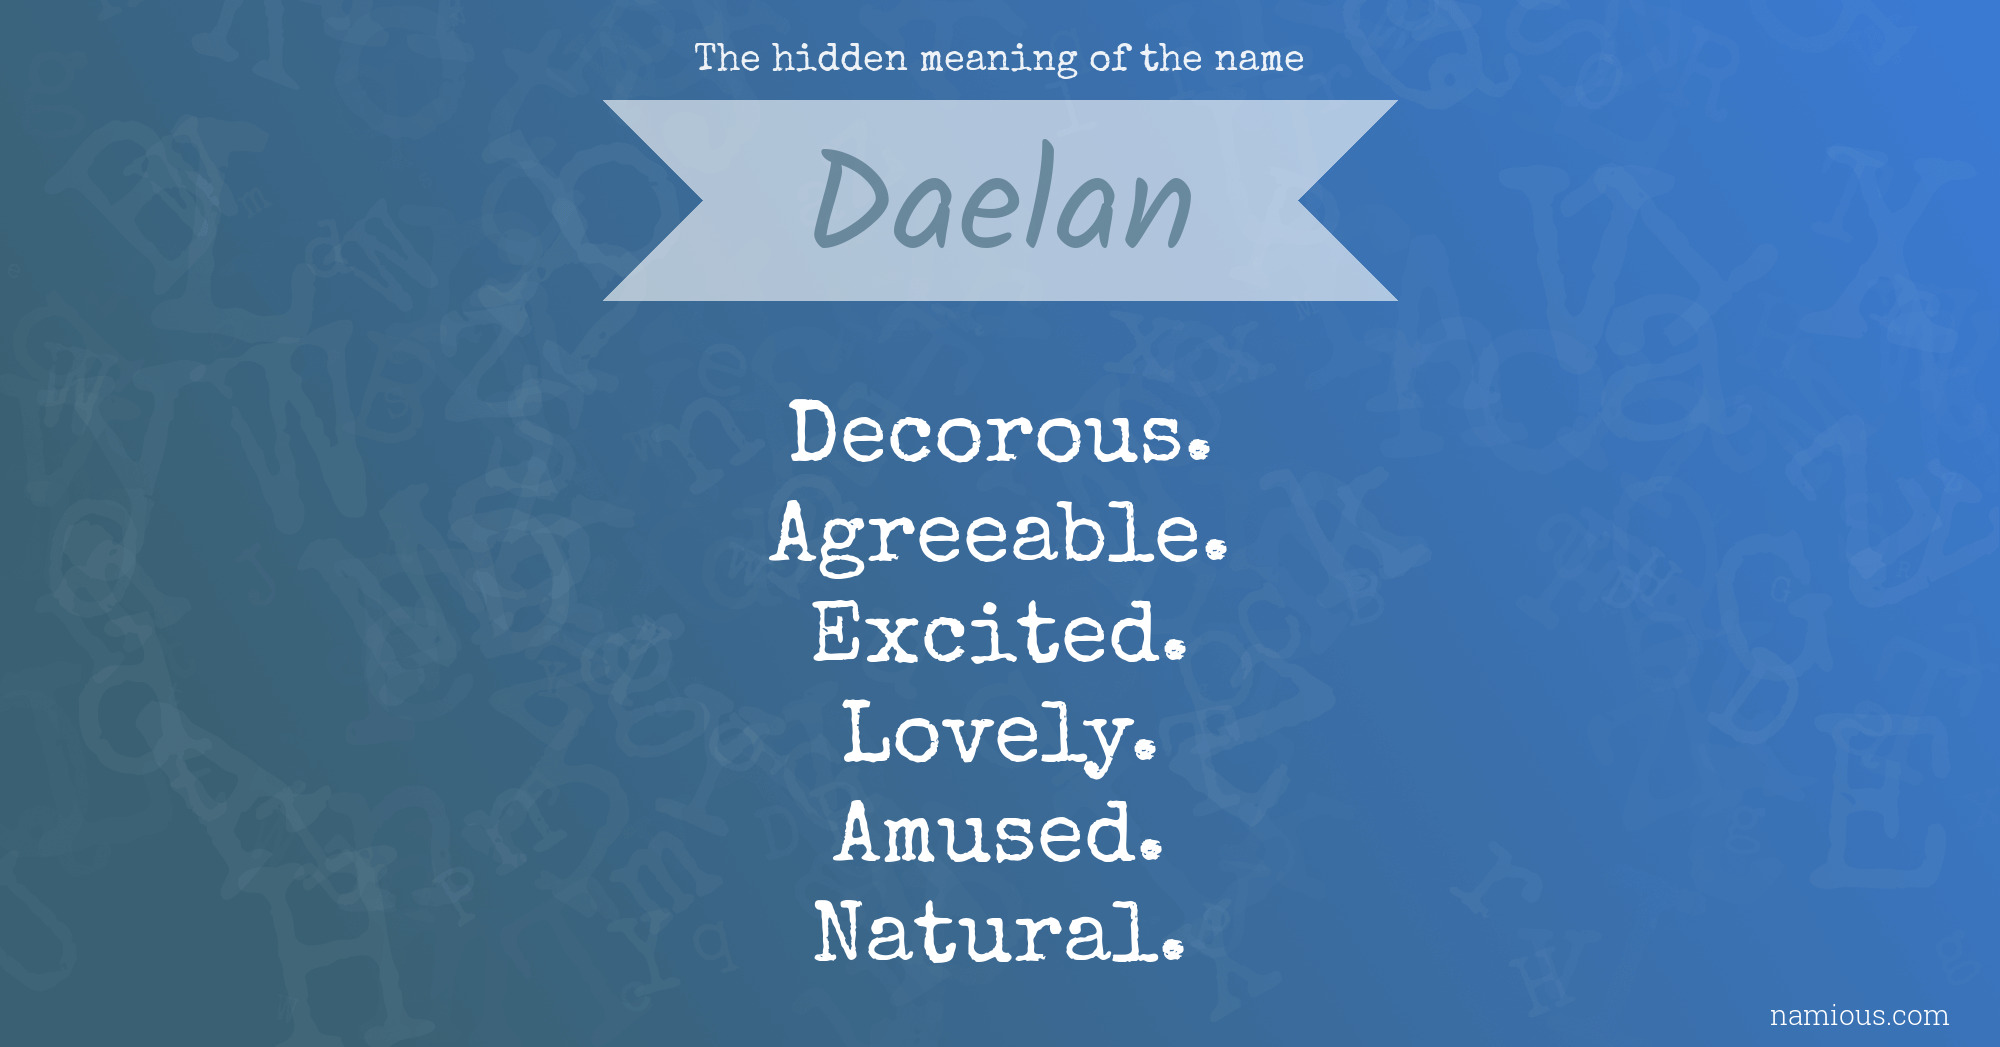 The hidden meaning of the name Daelan